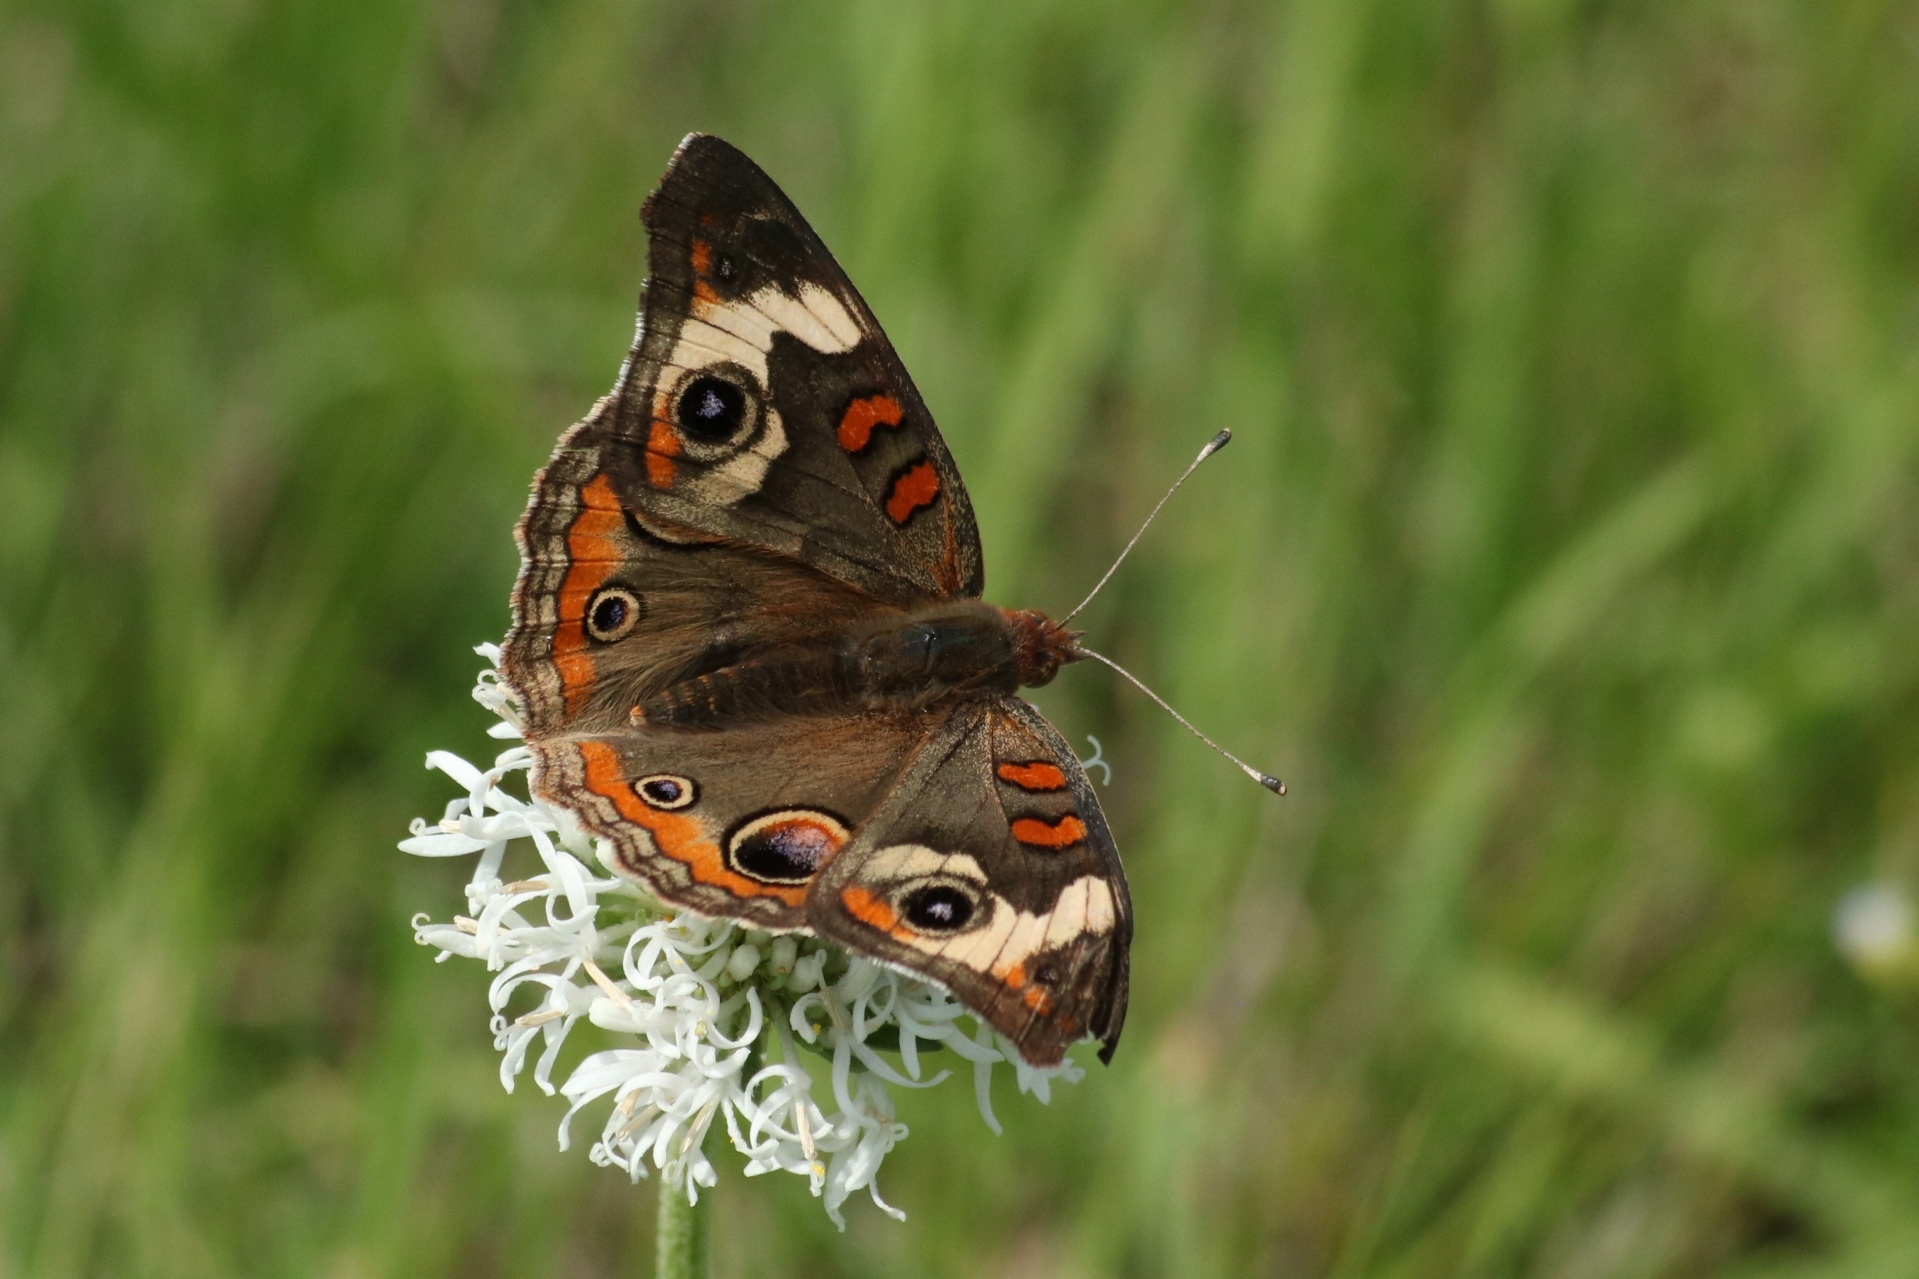 Close-up of a common buckeye butterfly on a white flower, with a green blurred background.